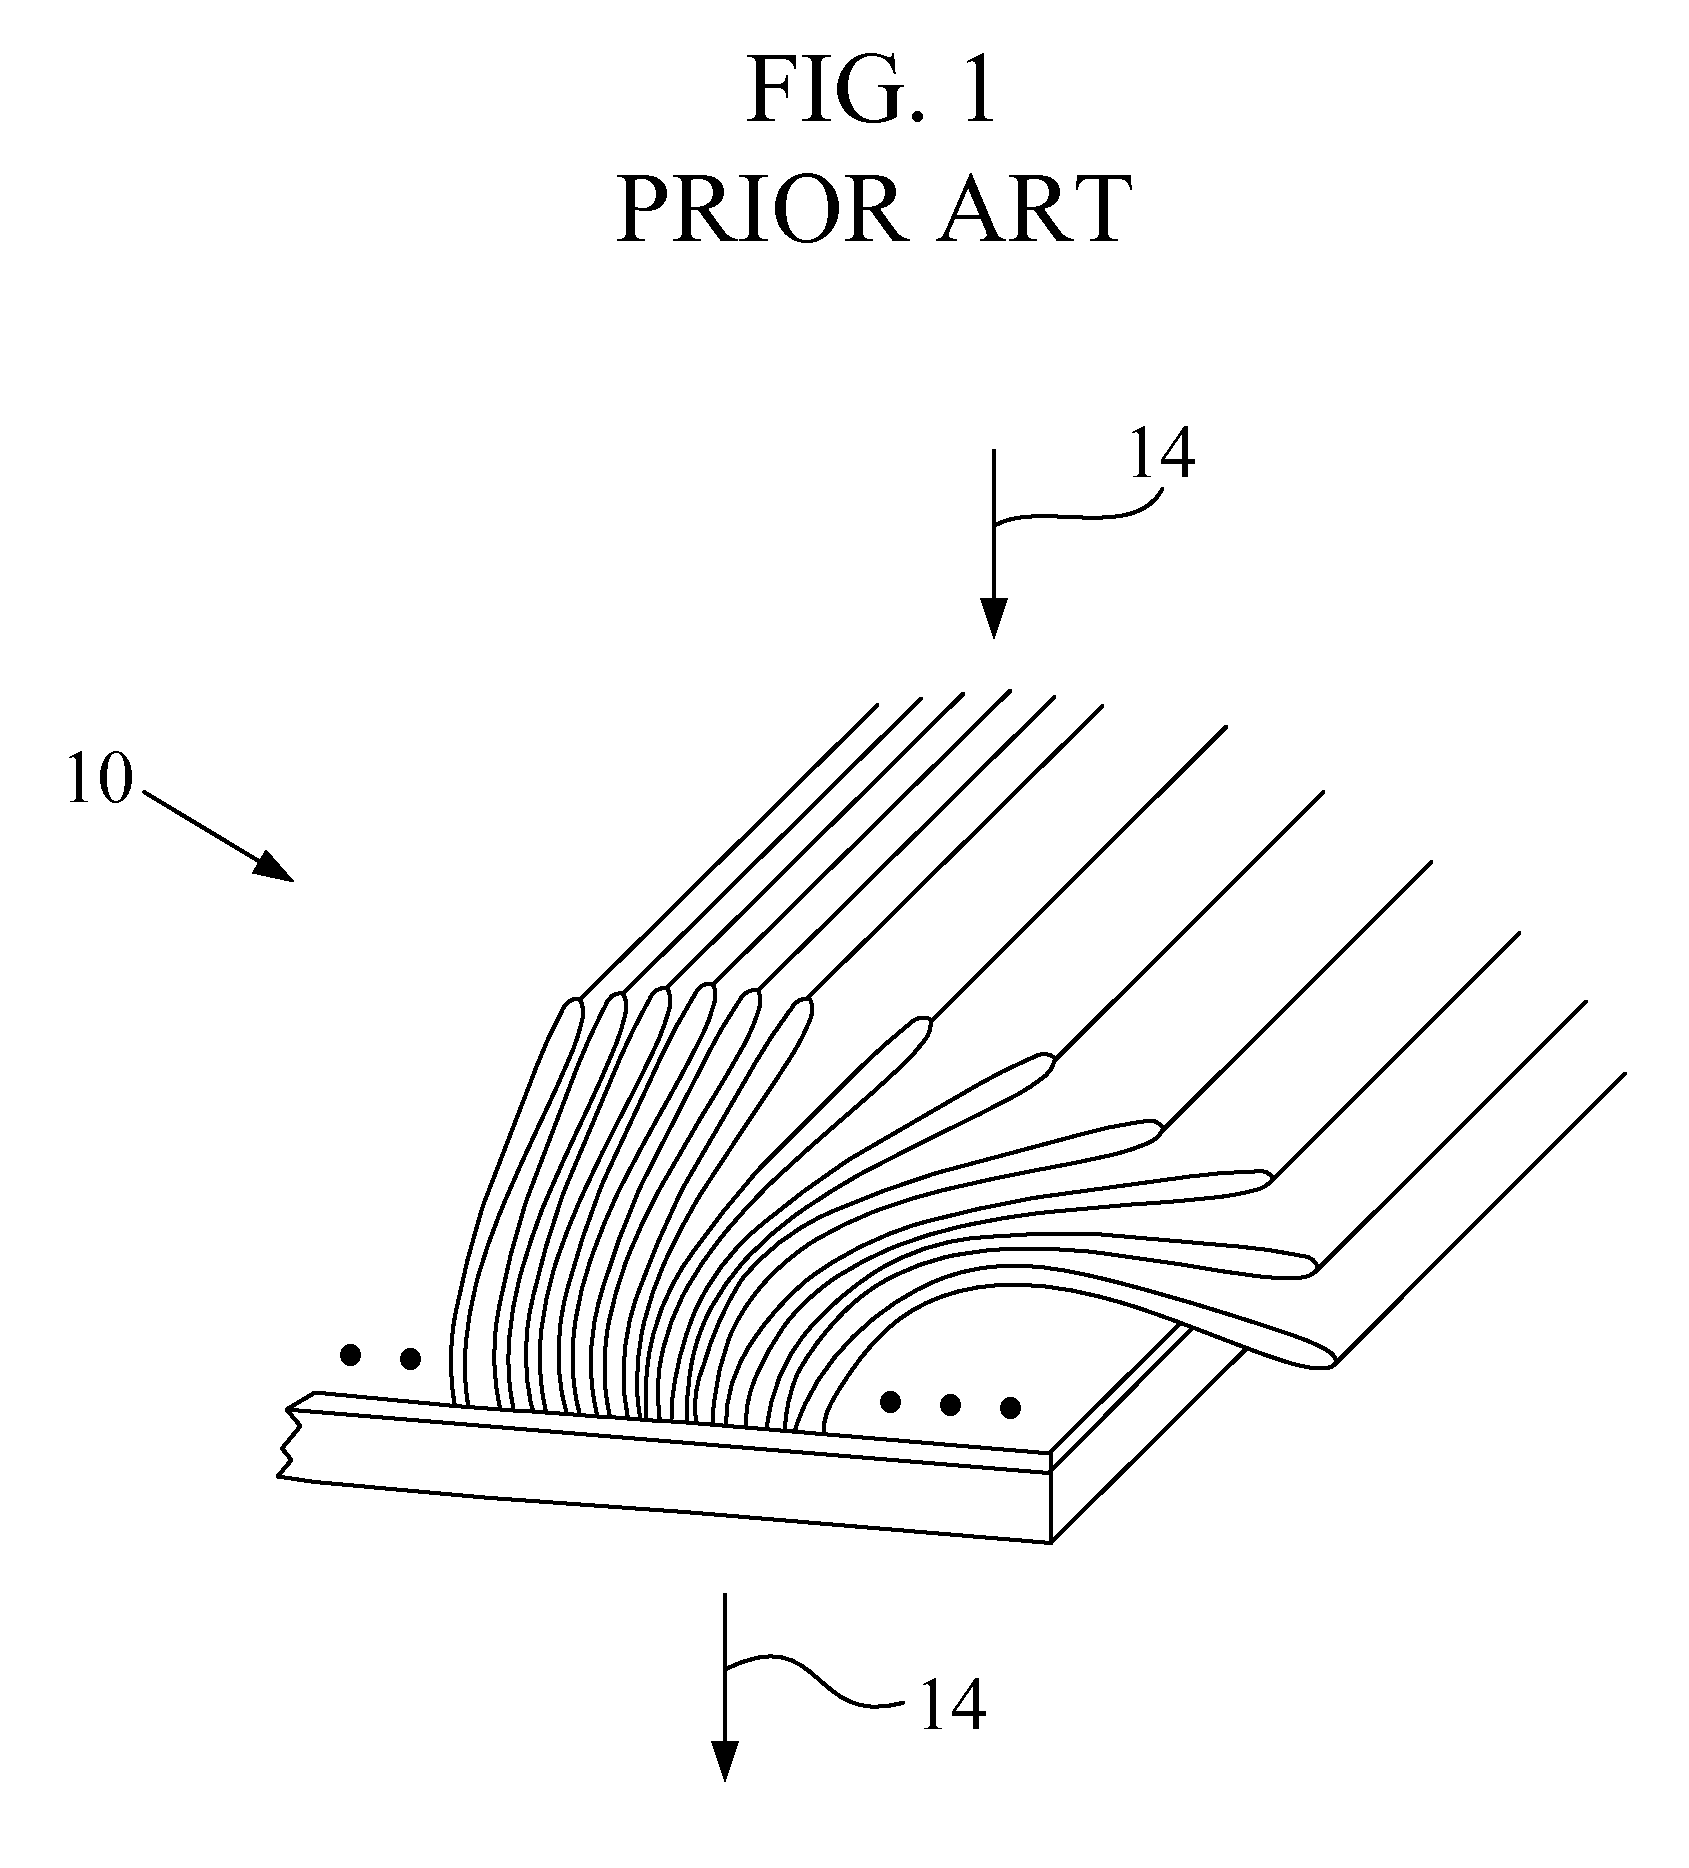 Filter element with pleat support combs